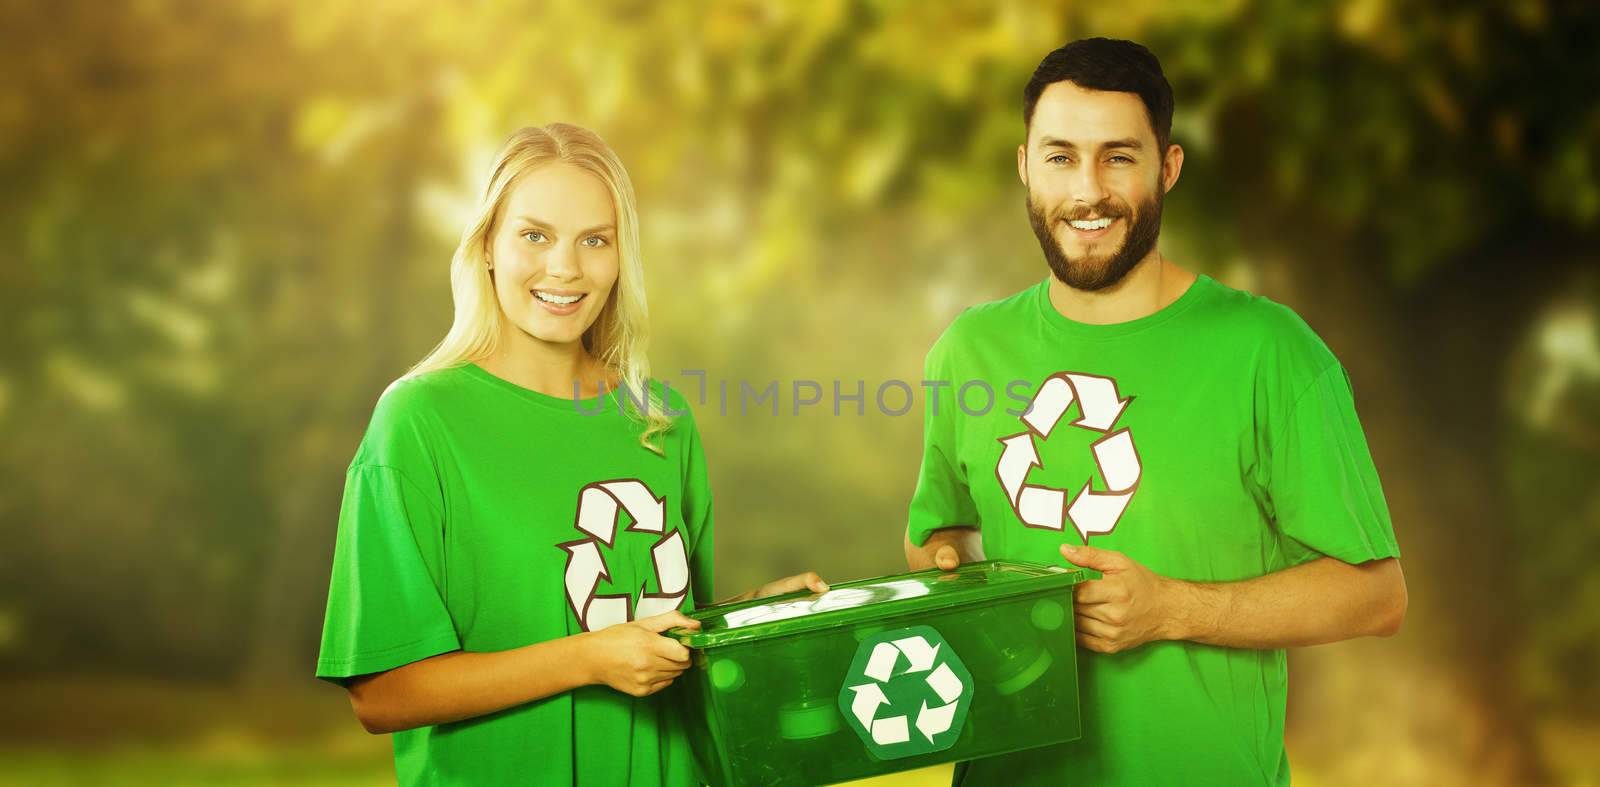 Portrait of smiling volunteers carrying recycling container  against trees and meadow in the park